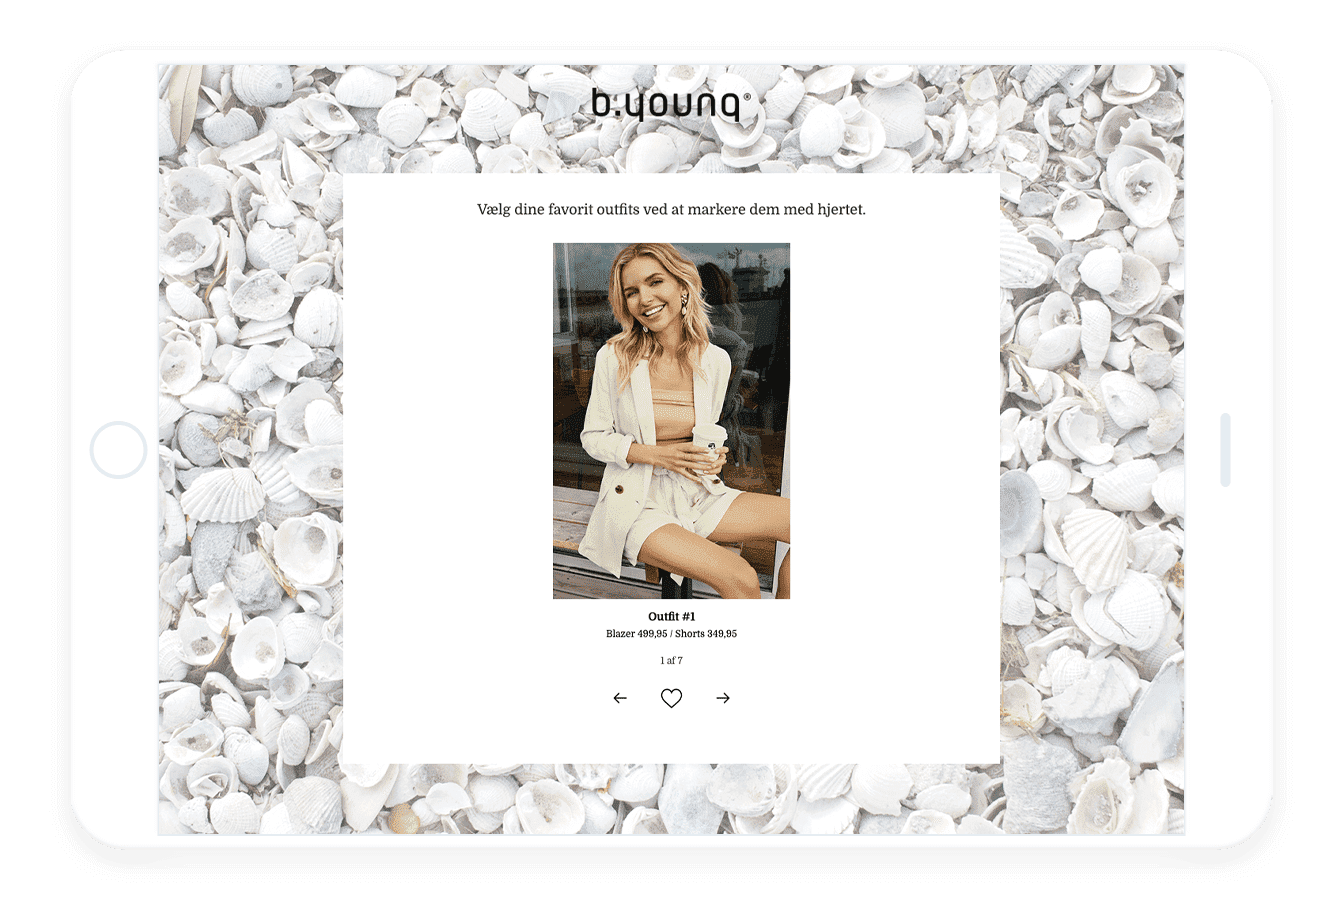 Product swipe with the image of a top model dressed in white. Shells on the background.